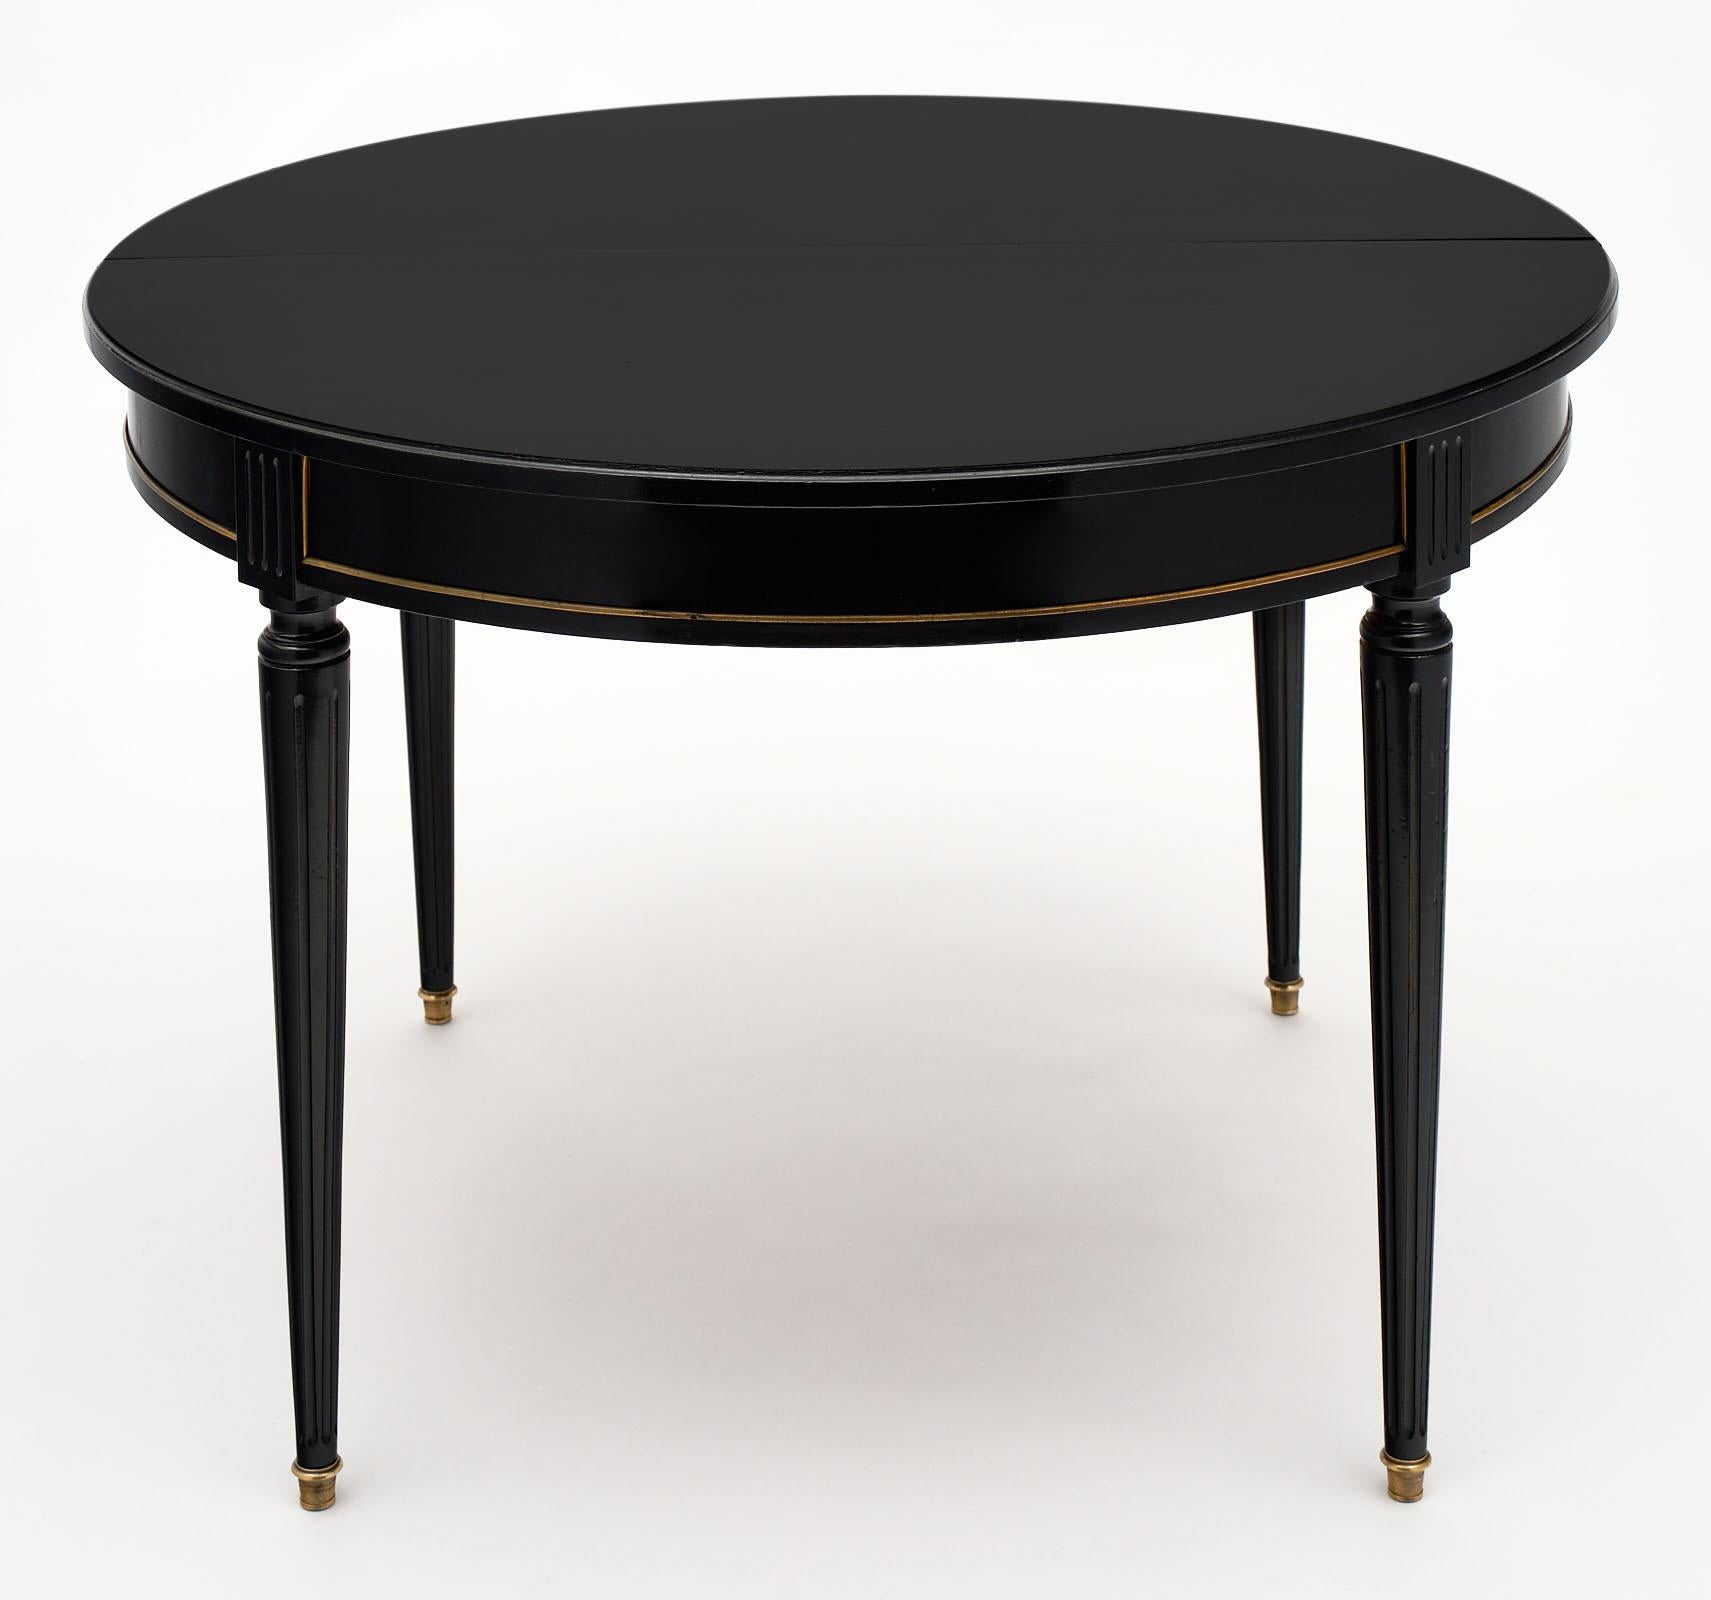 French Louis XVI style dining table made of solid mahogany and ebonized with a lustrous French polish finish. This table has one leaf which adds 15.375” to the total length.